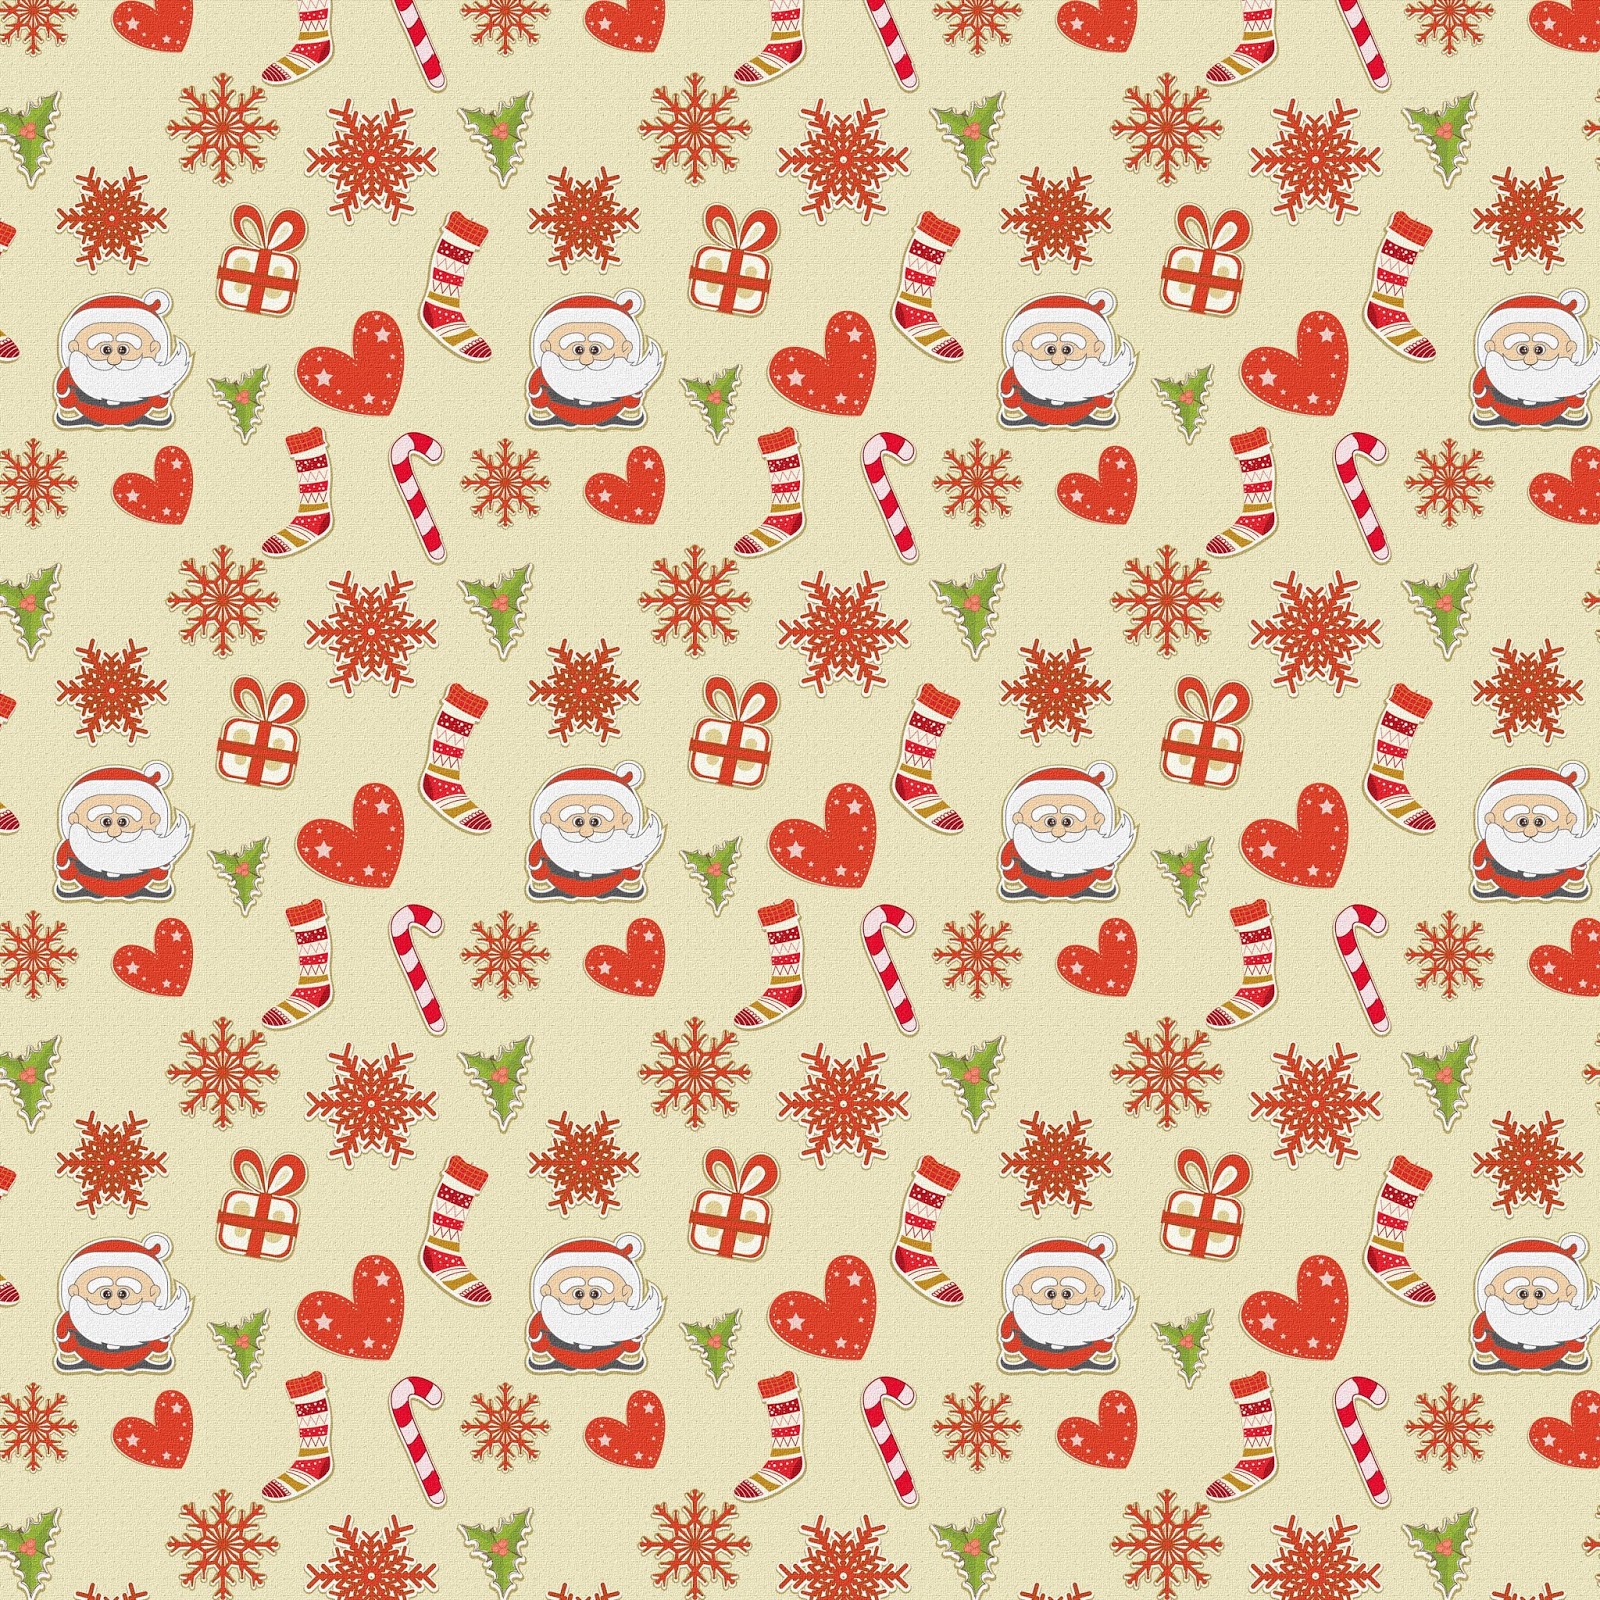 Santa Claus Papers. - Oh My Fiesta! in english